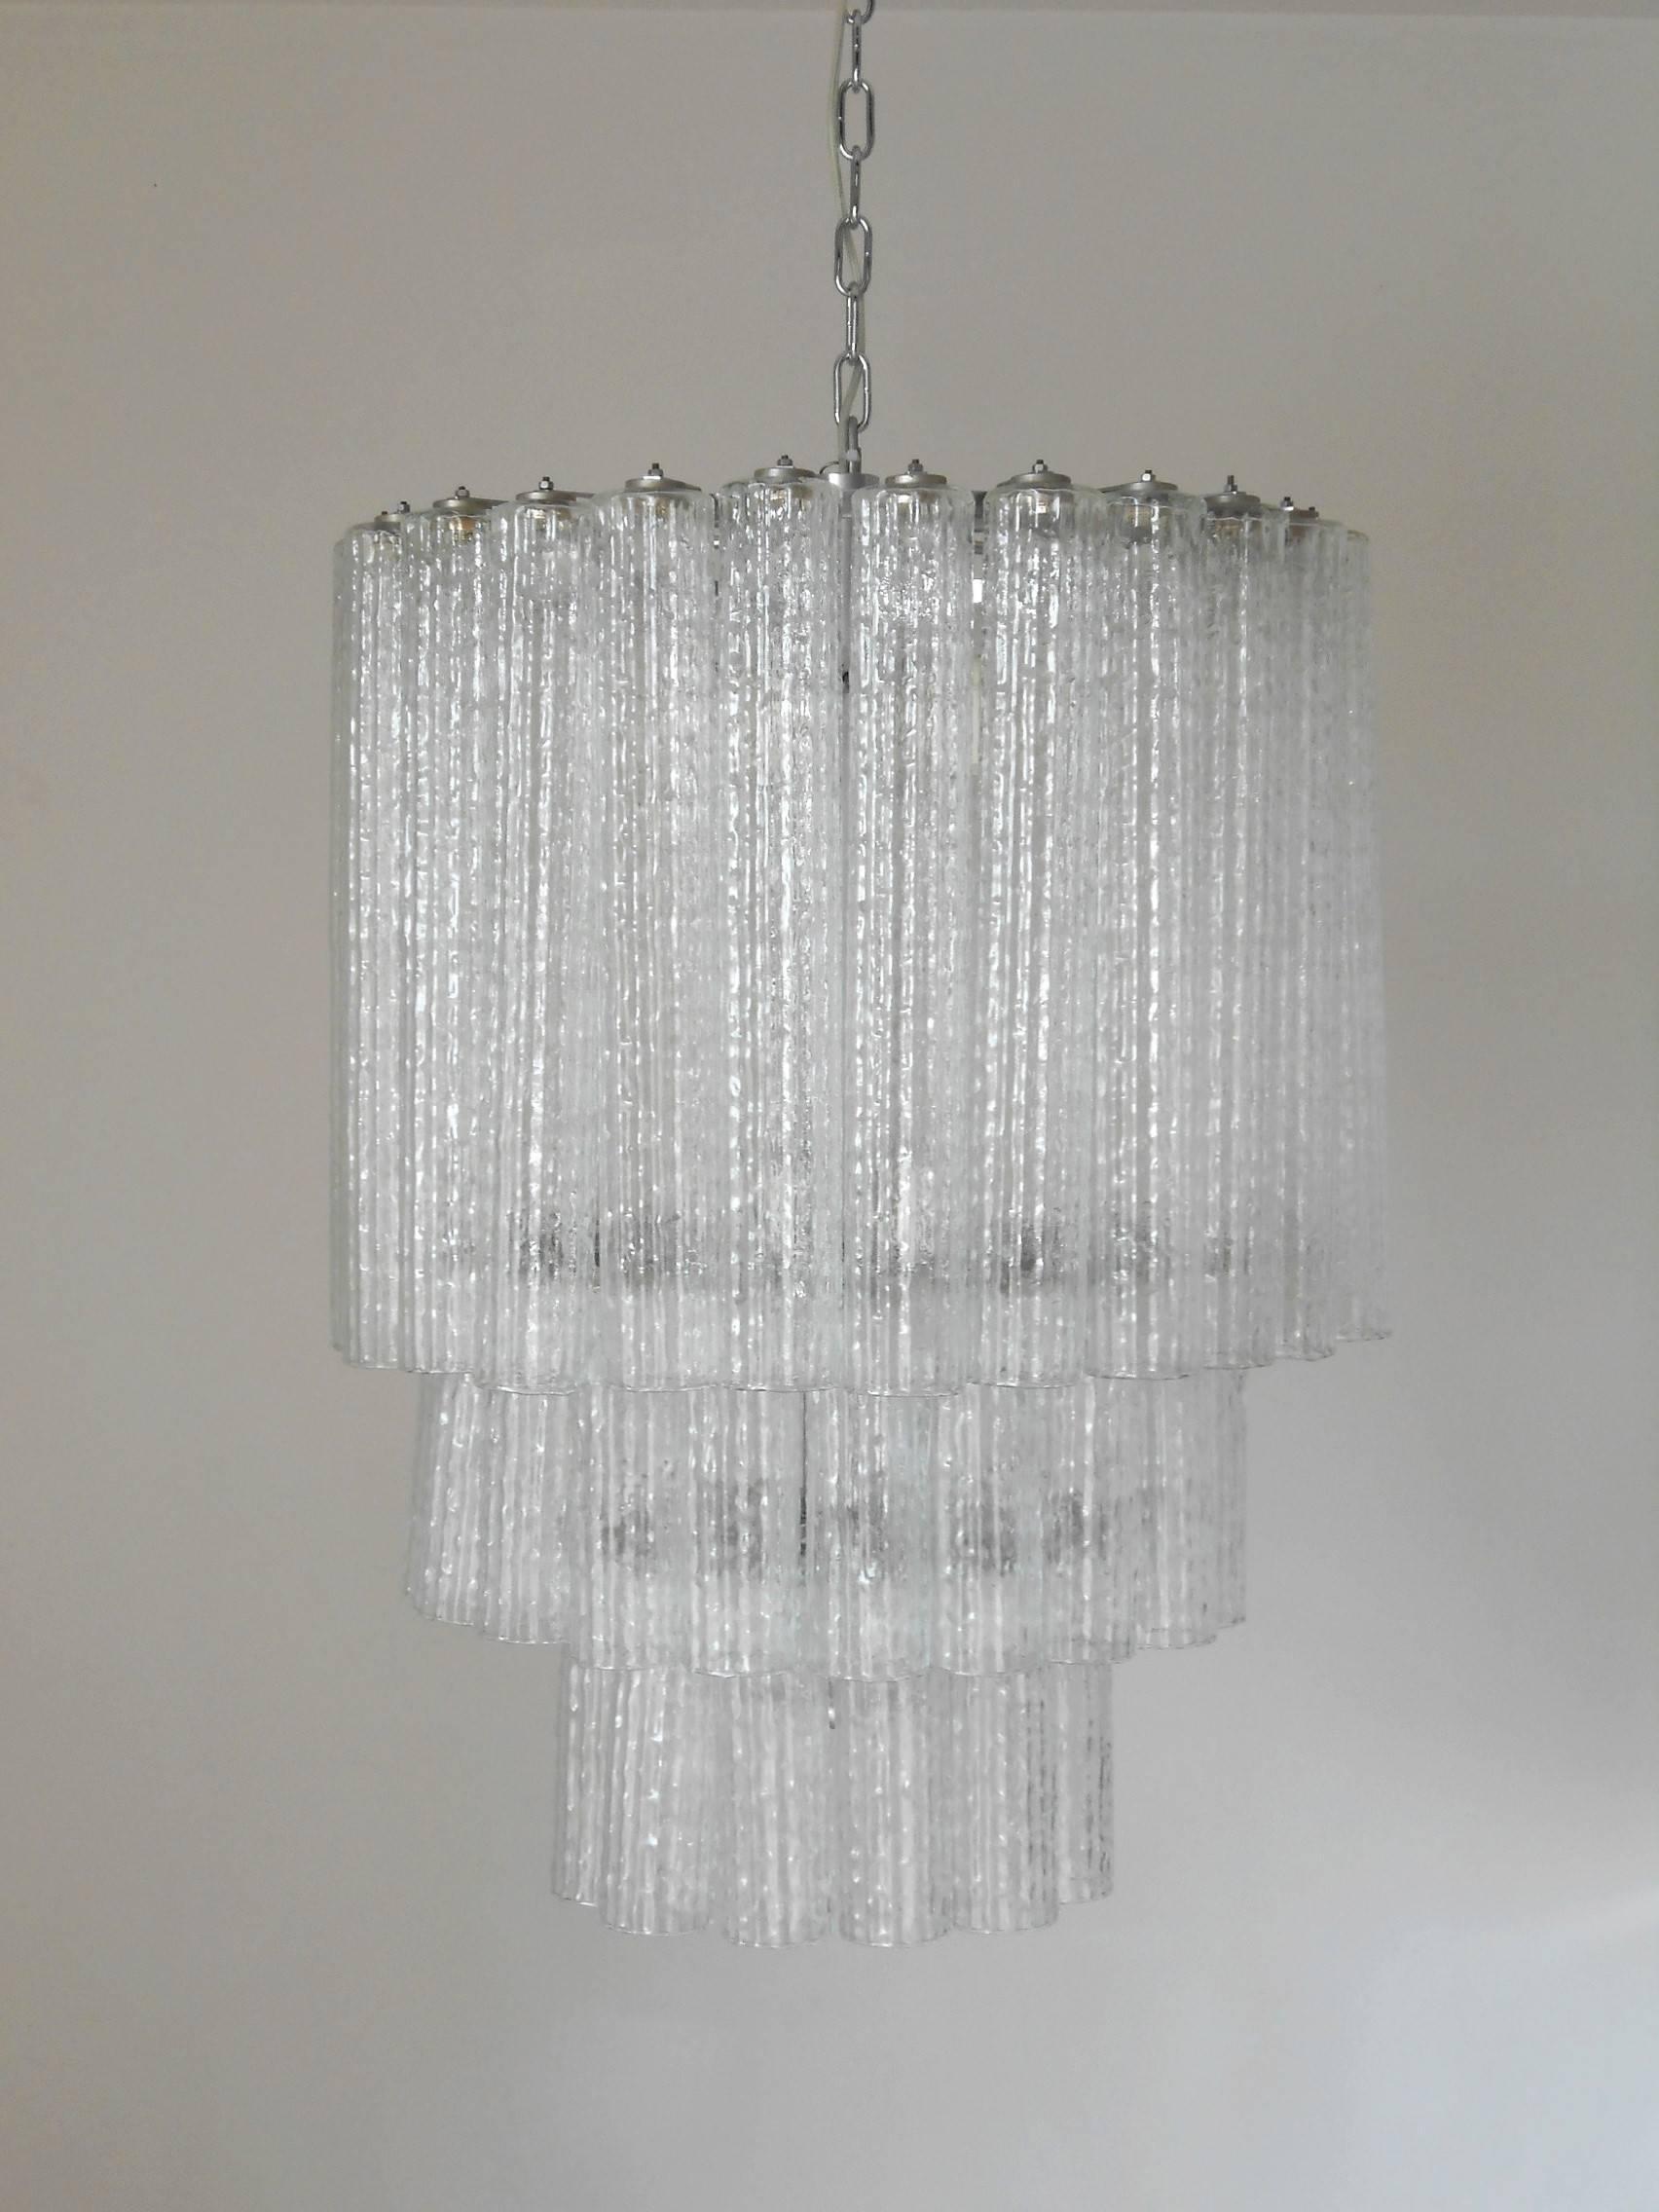 Textured Murano glass tubes hanging from chrome frame.

Ten-light sockets / Wired for the US.